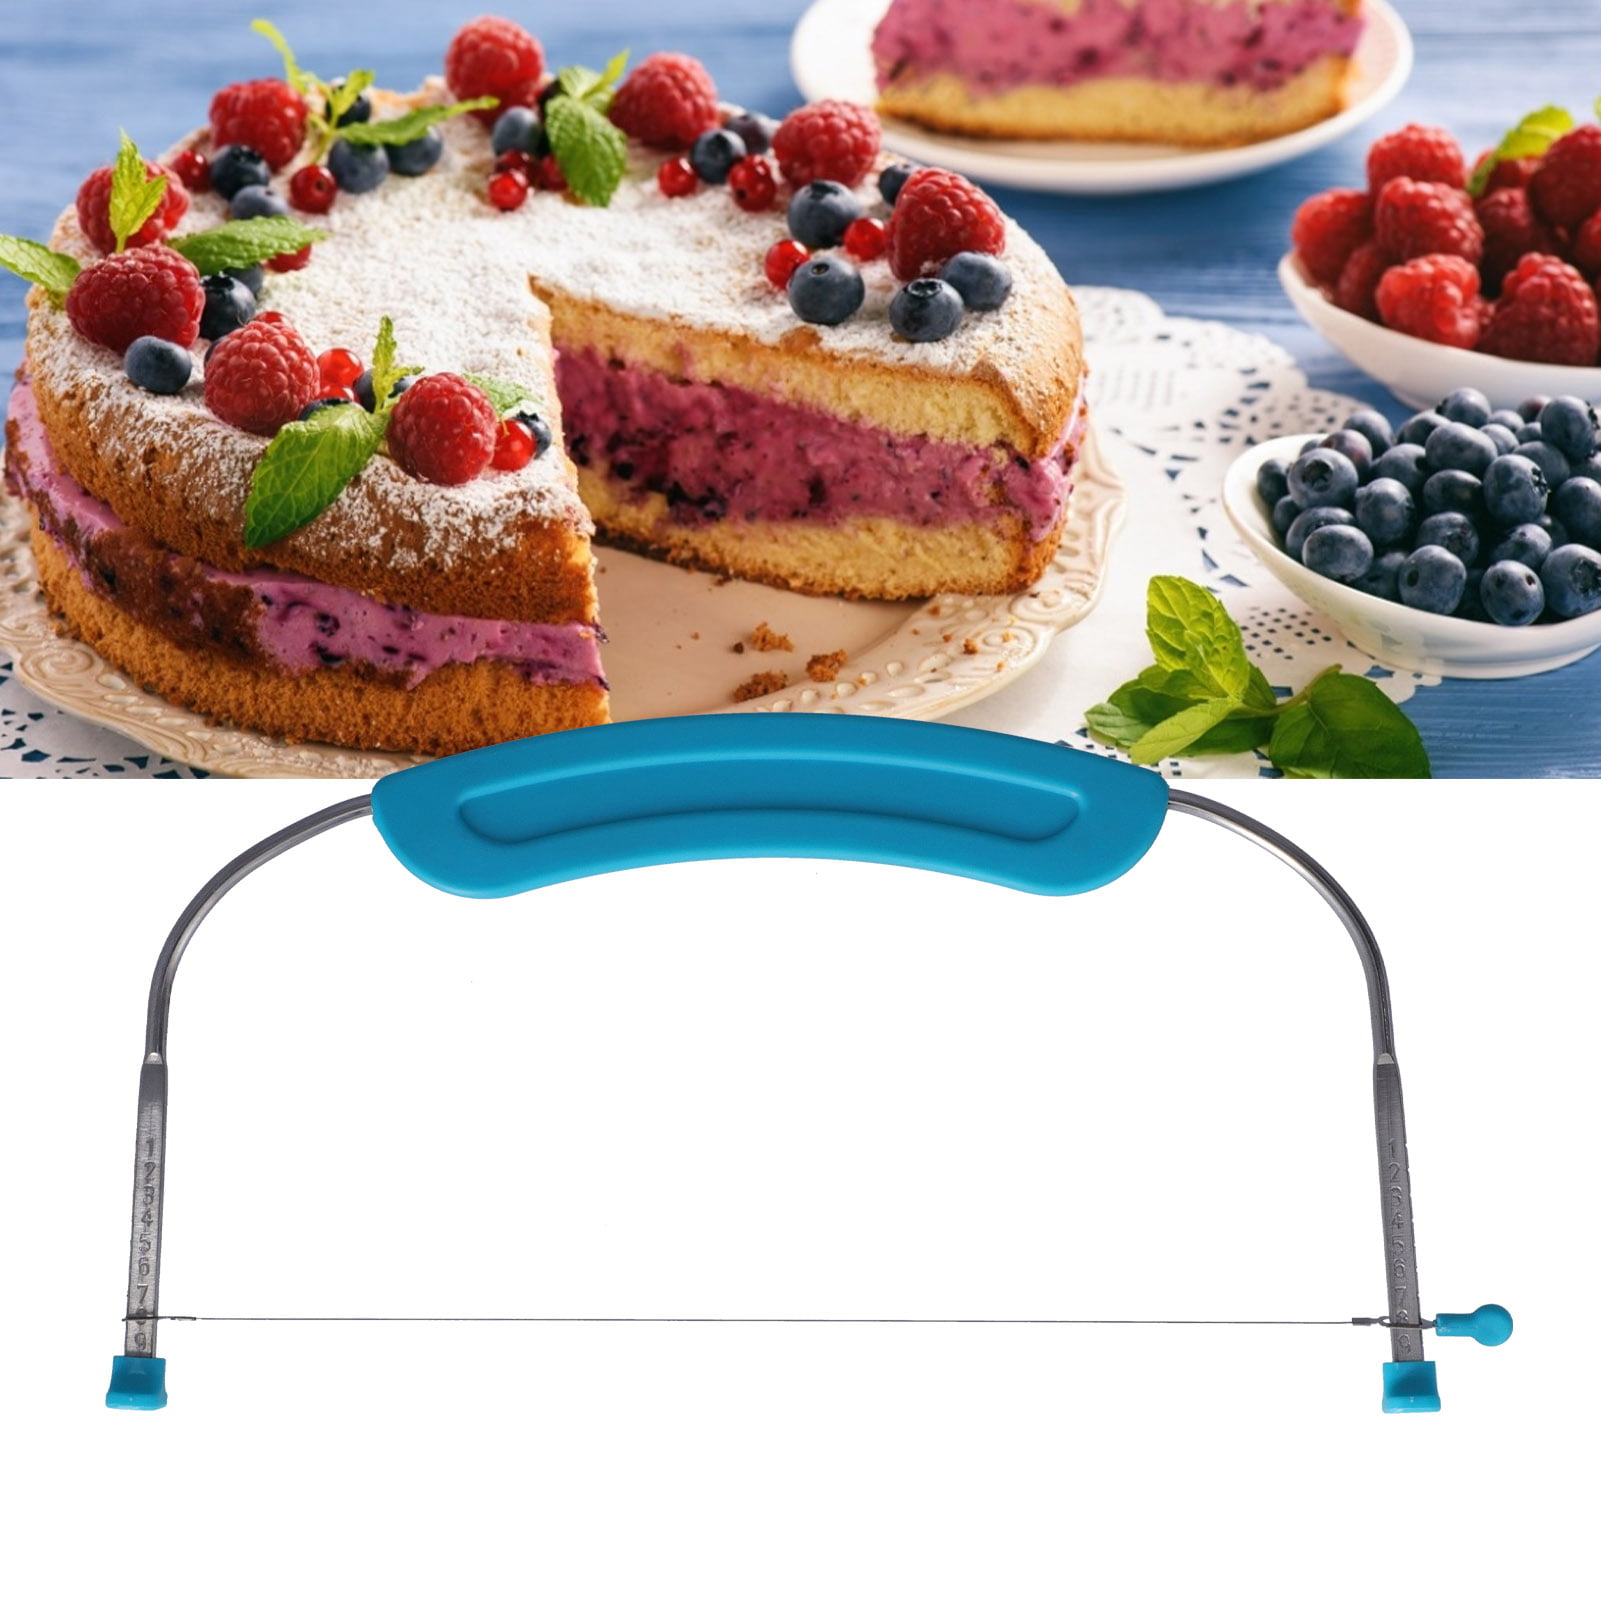 Details about   Durable Cake Saw Stainless Steel Cake Cutter Baking for Home Bake Shop Kirchen 